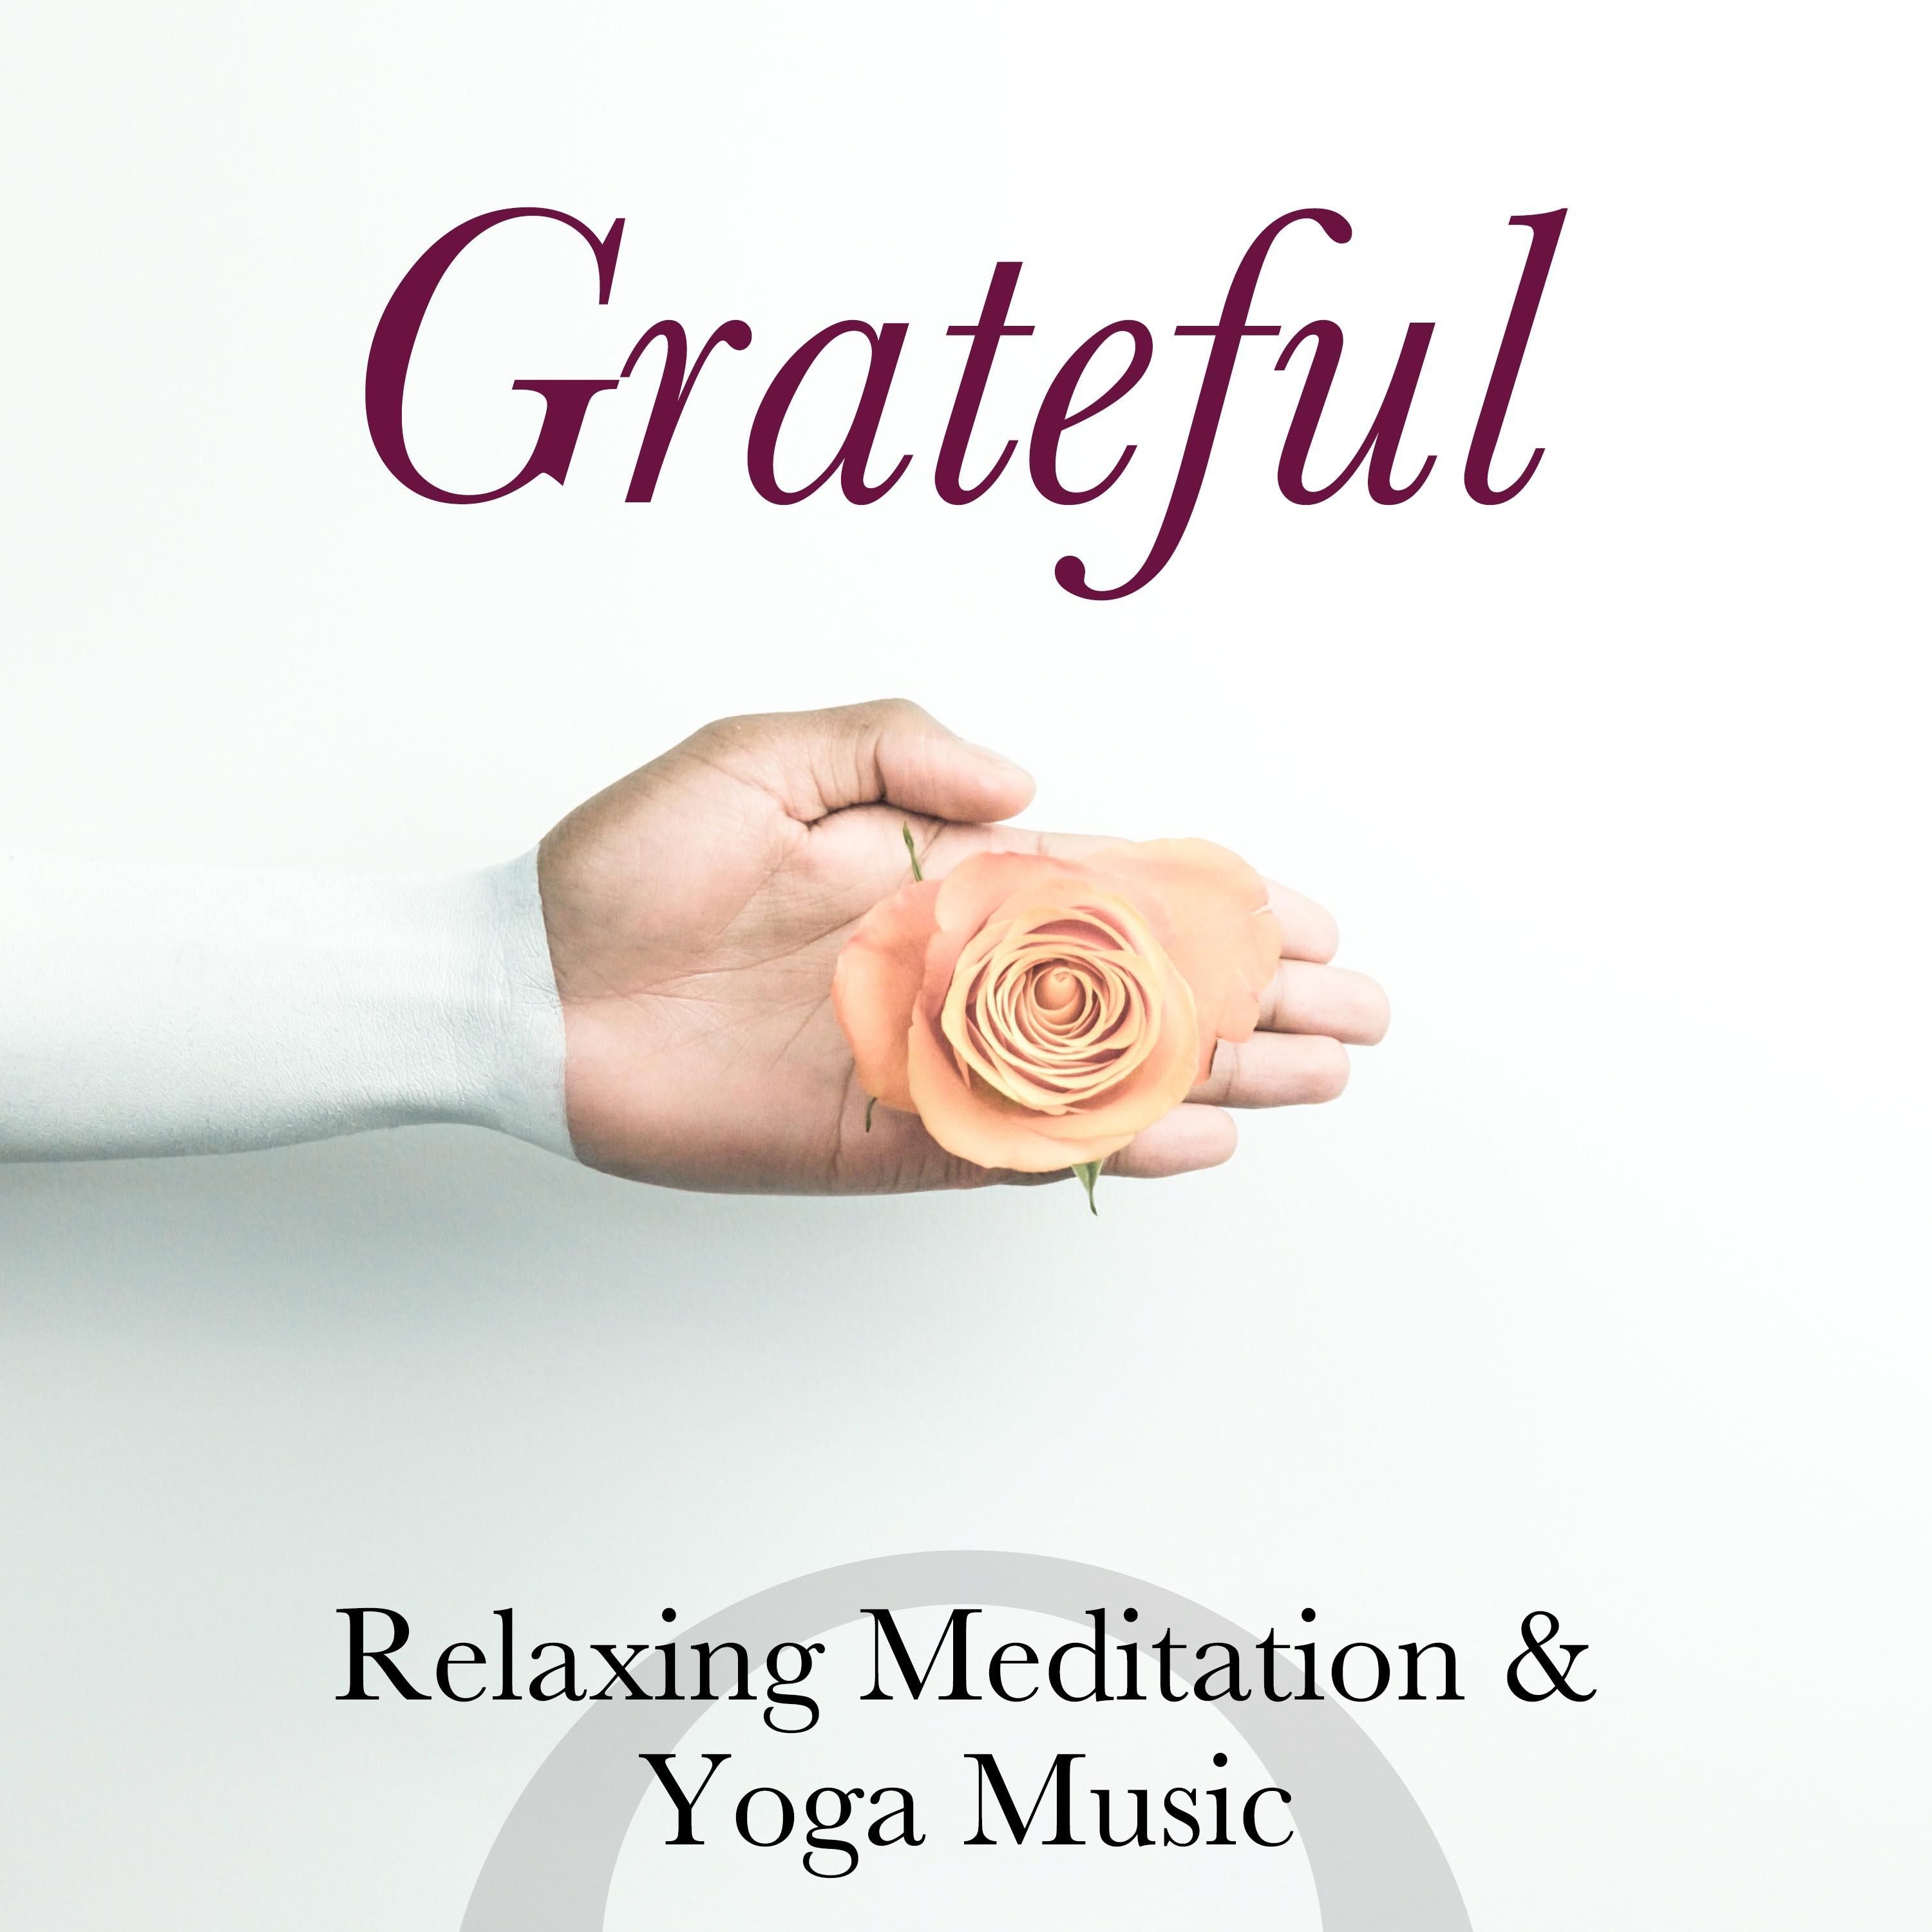 Grateful: Relaxing Meditation & Yoga Music to Calm Wild Thoughts, Find Inner Peace, Happiness, Serenity,